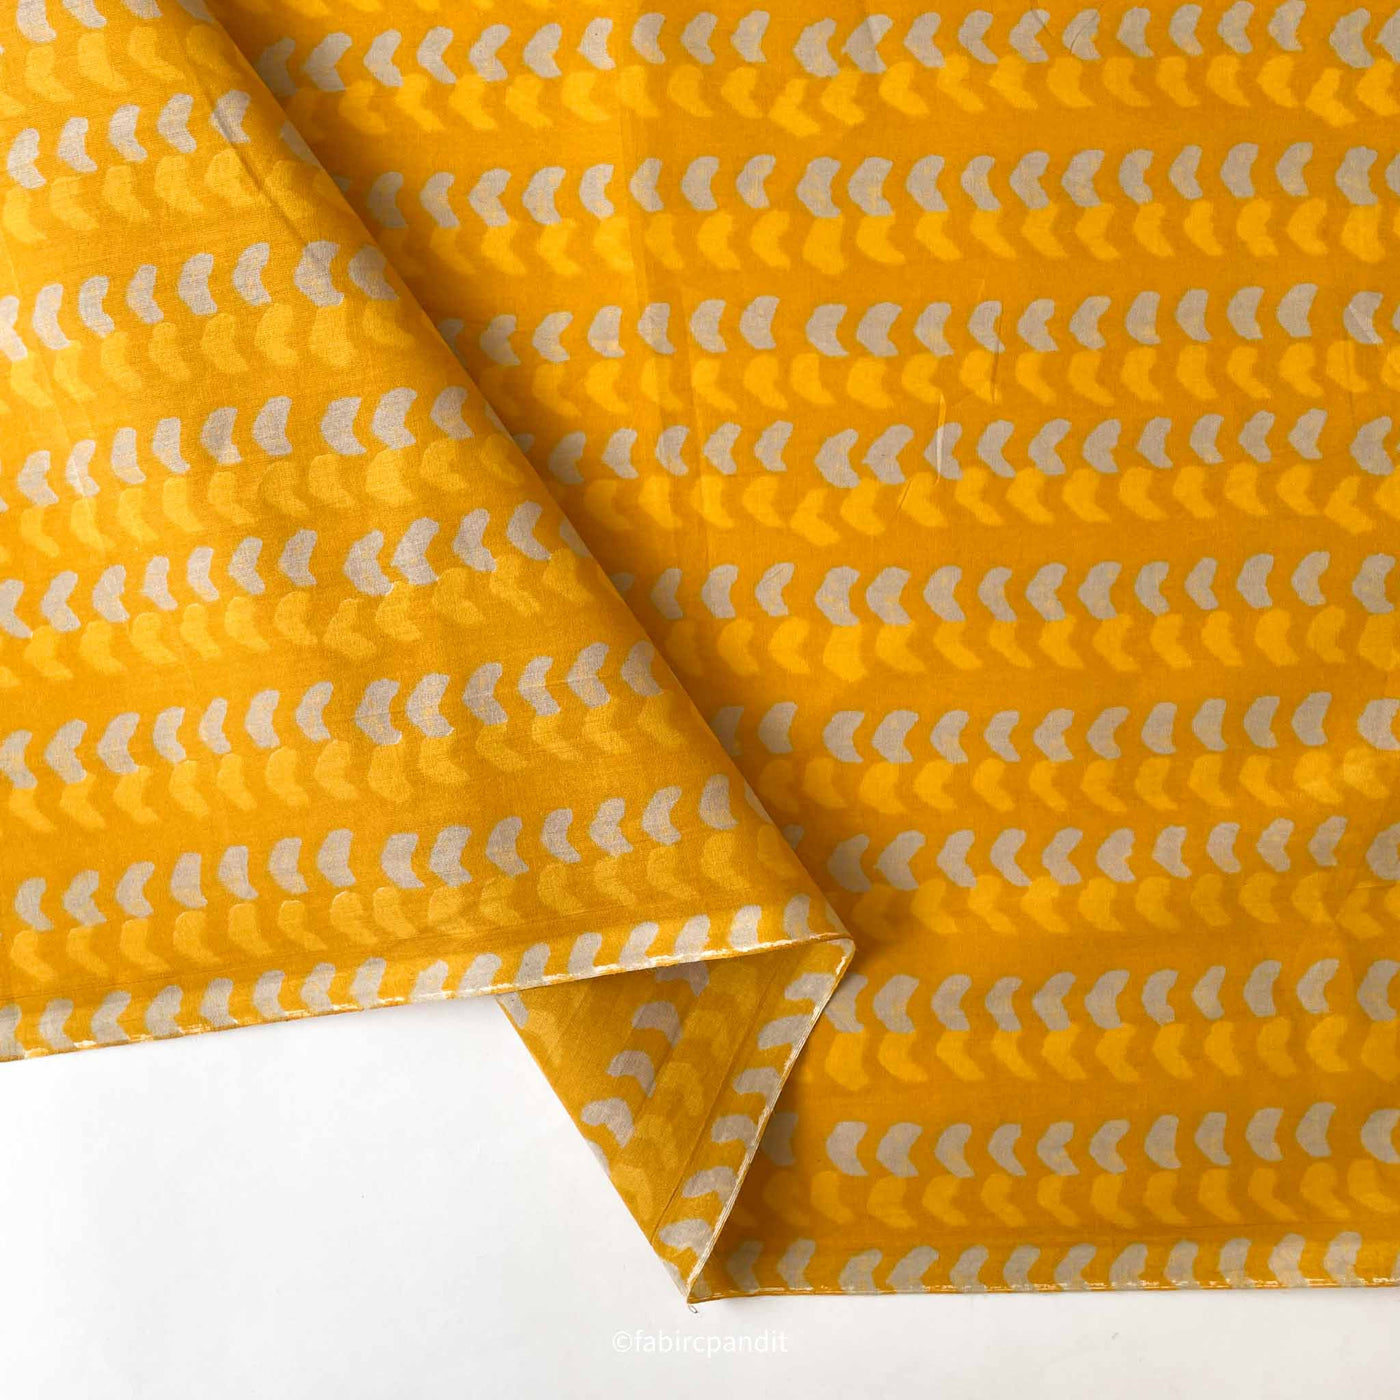 Fabric Pandit Cut Piece (Cut Piece) Dusty Yellow and Grey Geometric Stripes Hand Block Printed Pure Cotton Fabric (Width 43 inches)